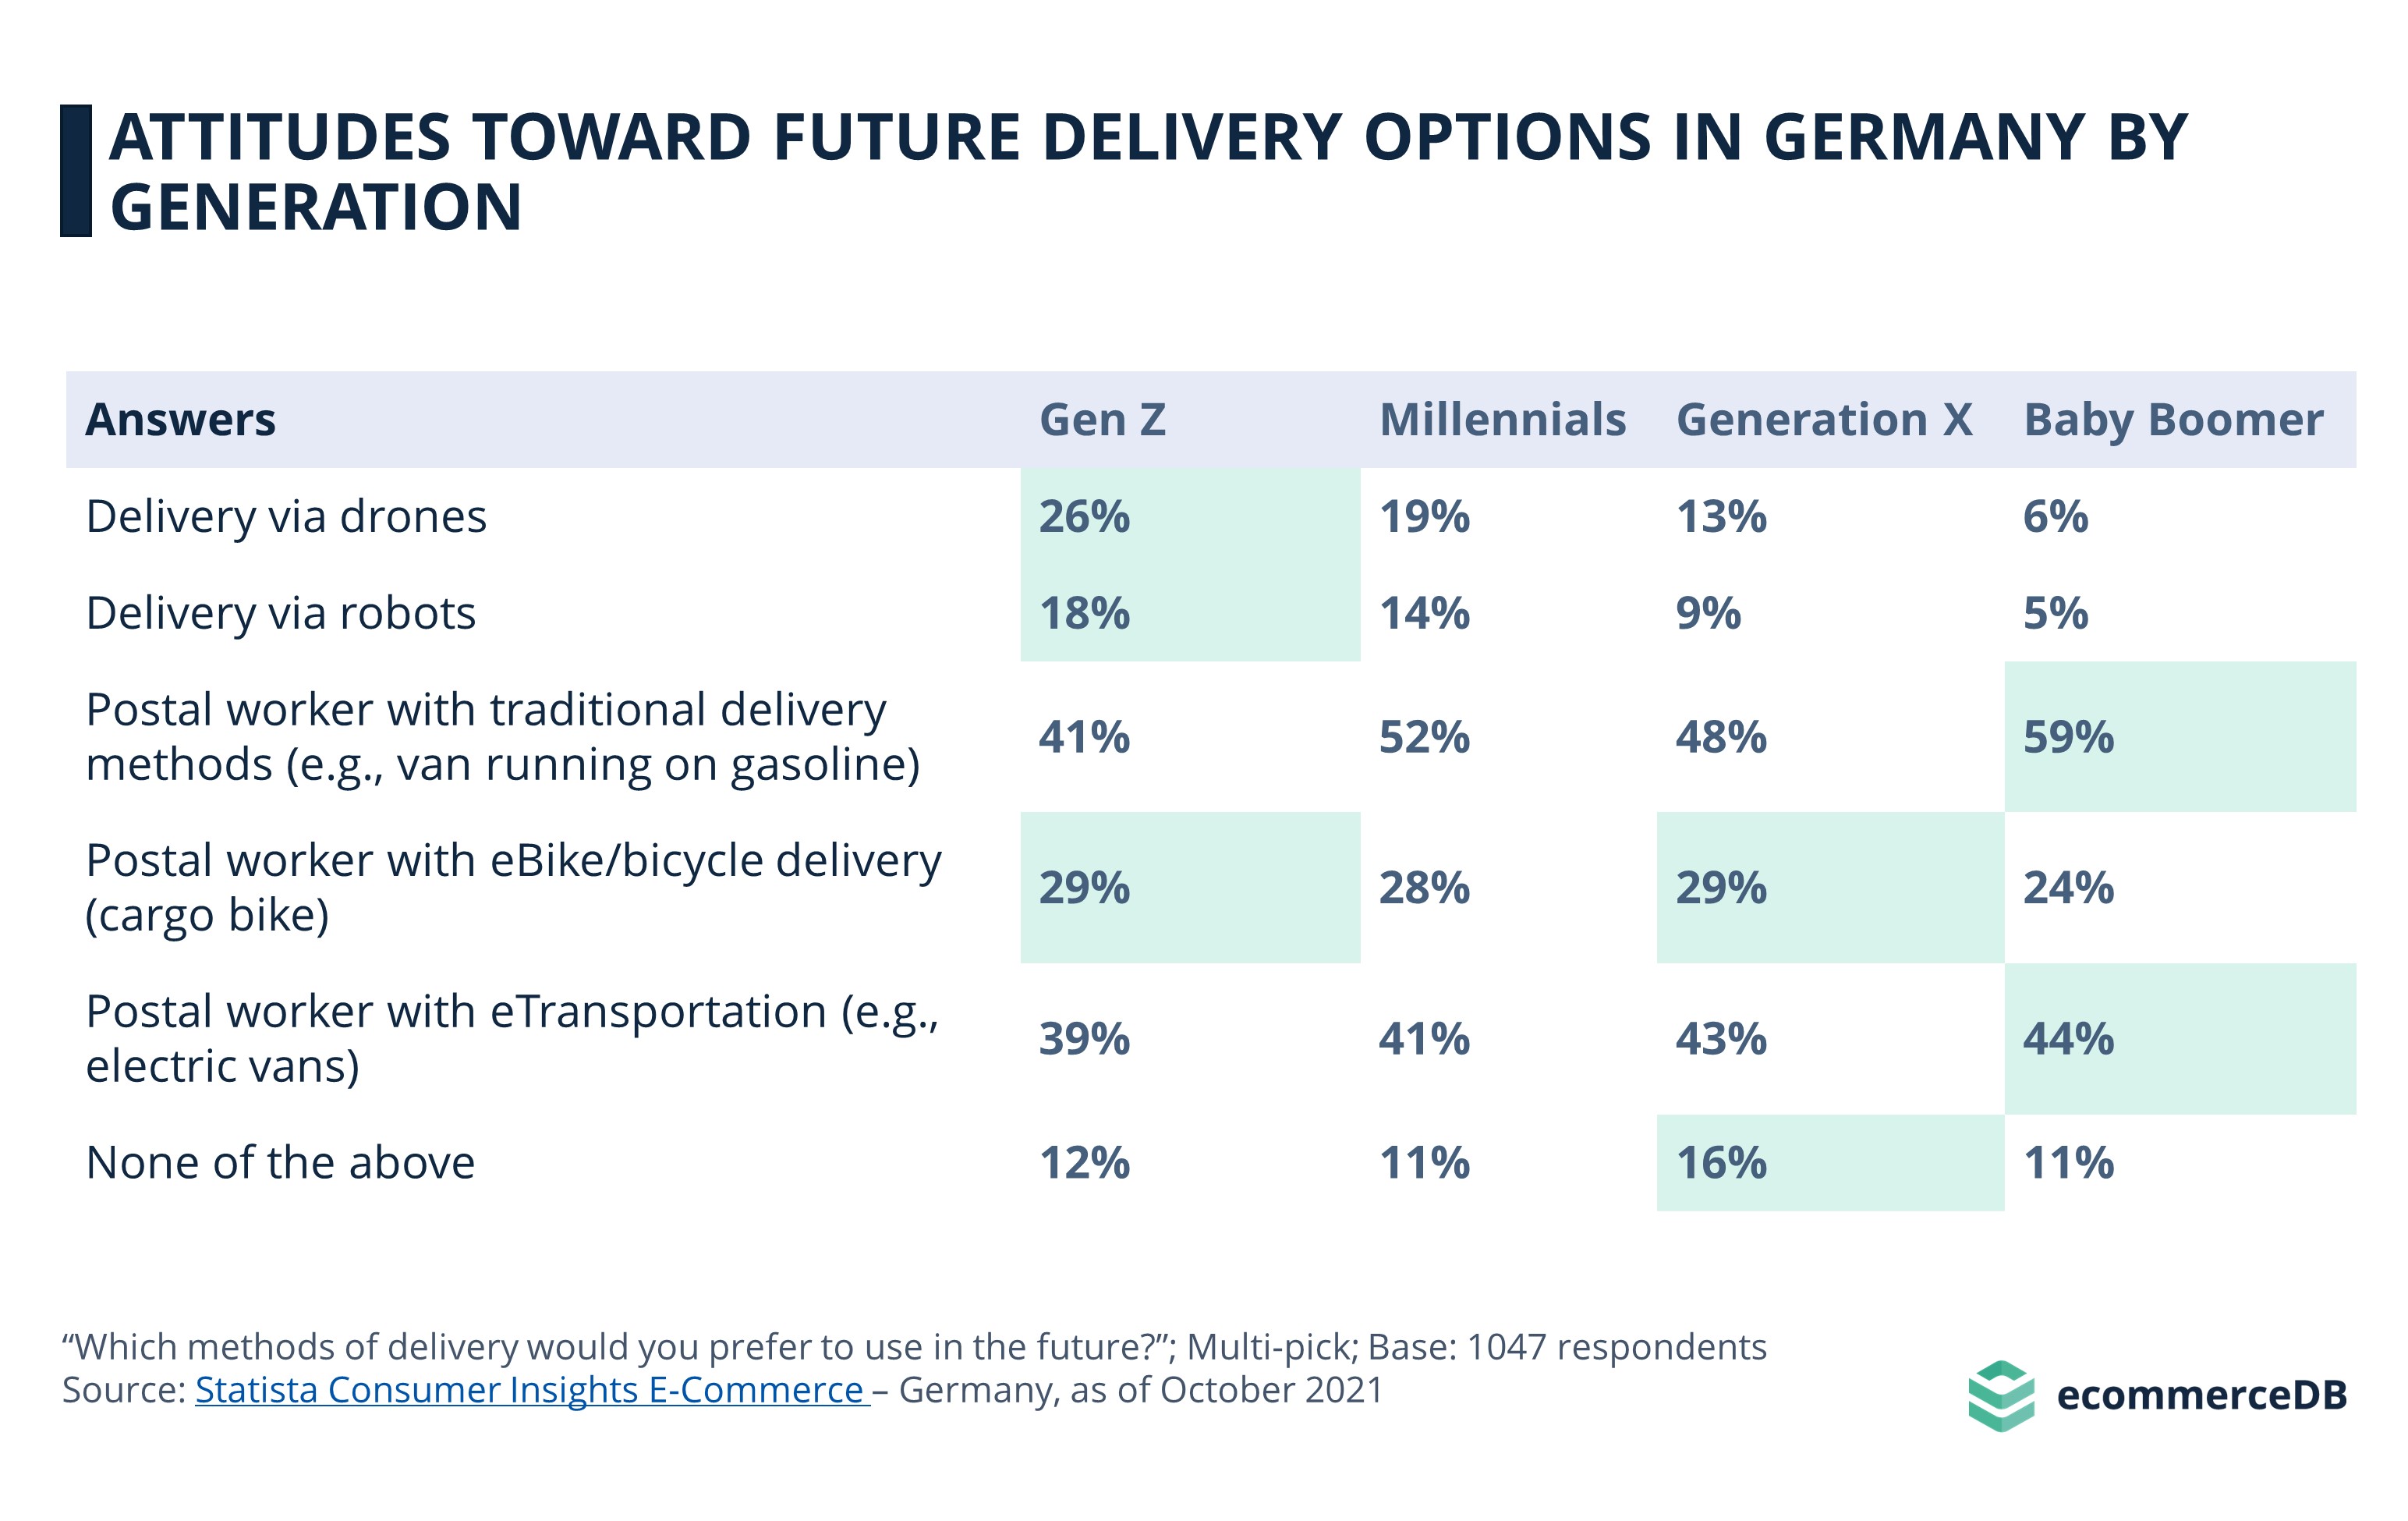 Attitudes toward future delivery options in Germany by generation